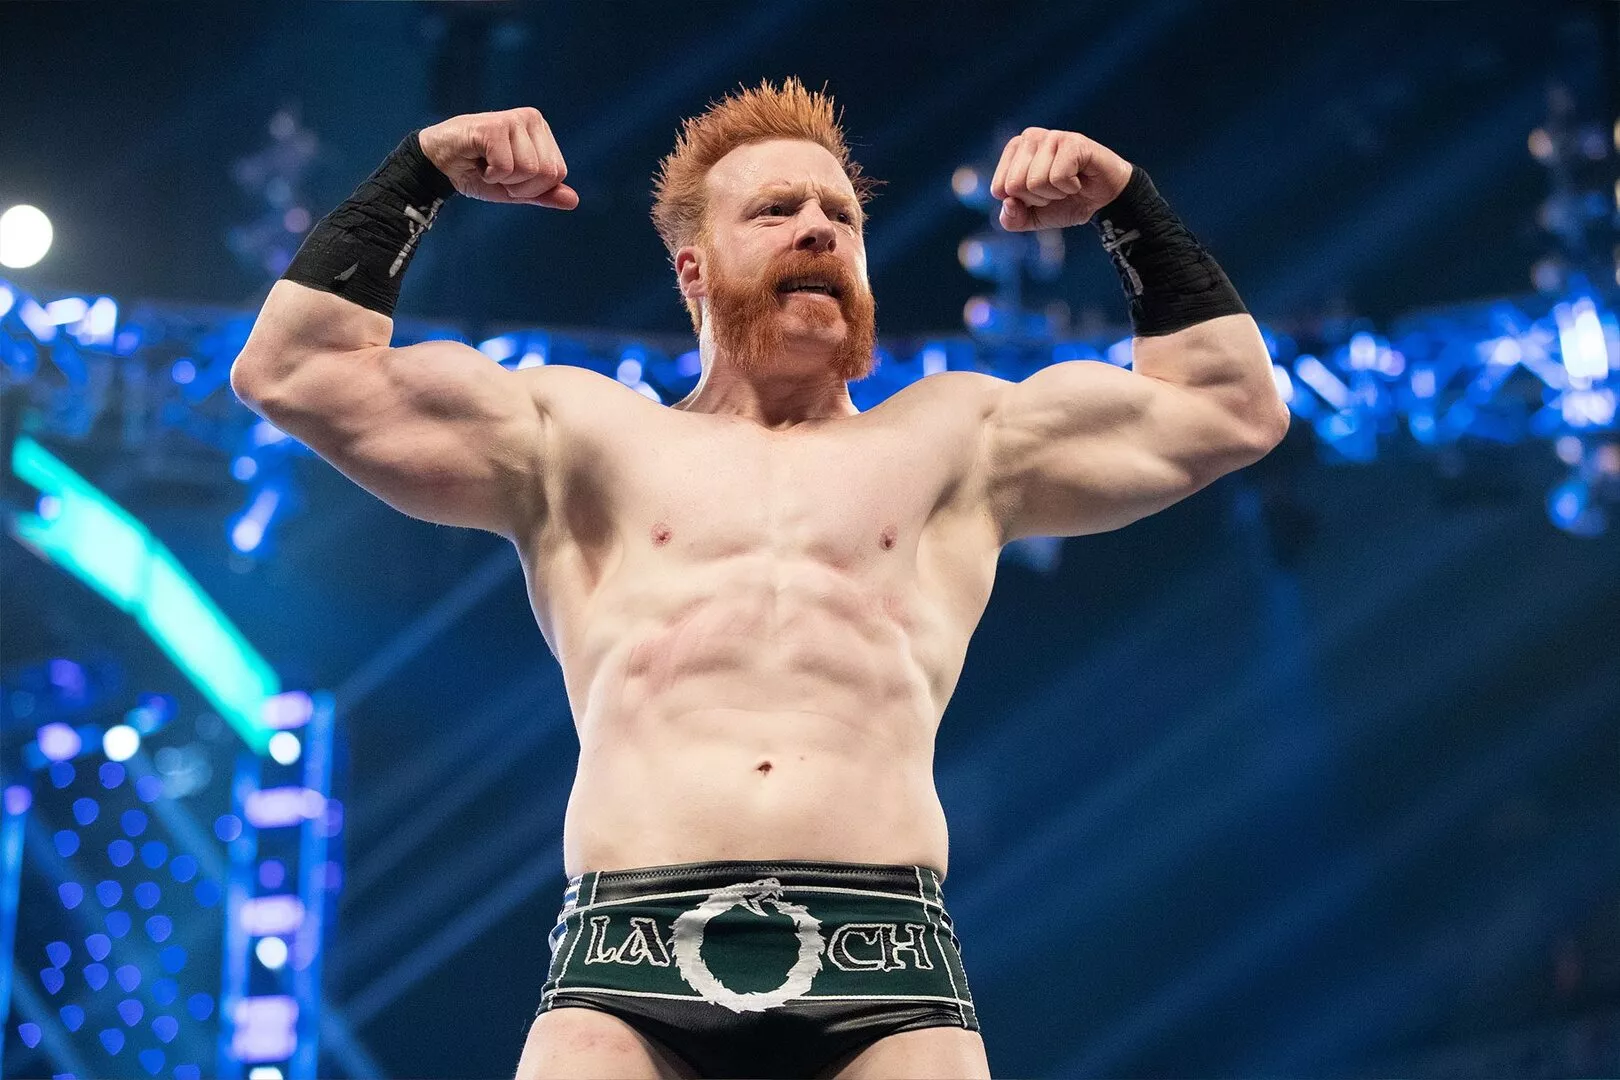 Sheamus to join AEW following WWE contract expiry?